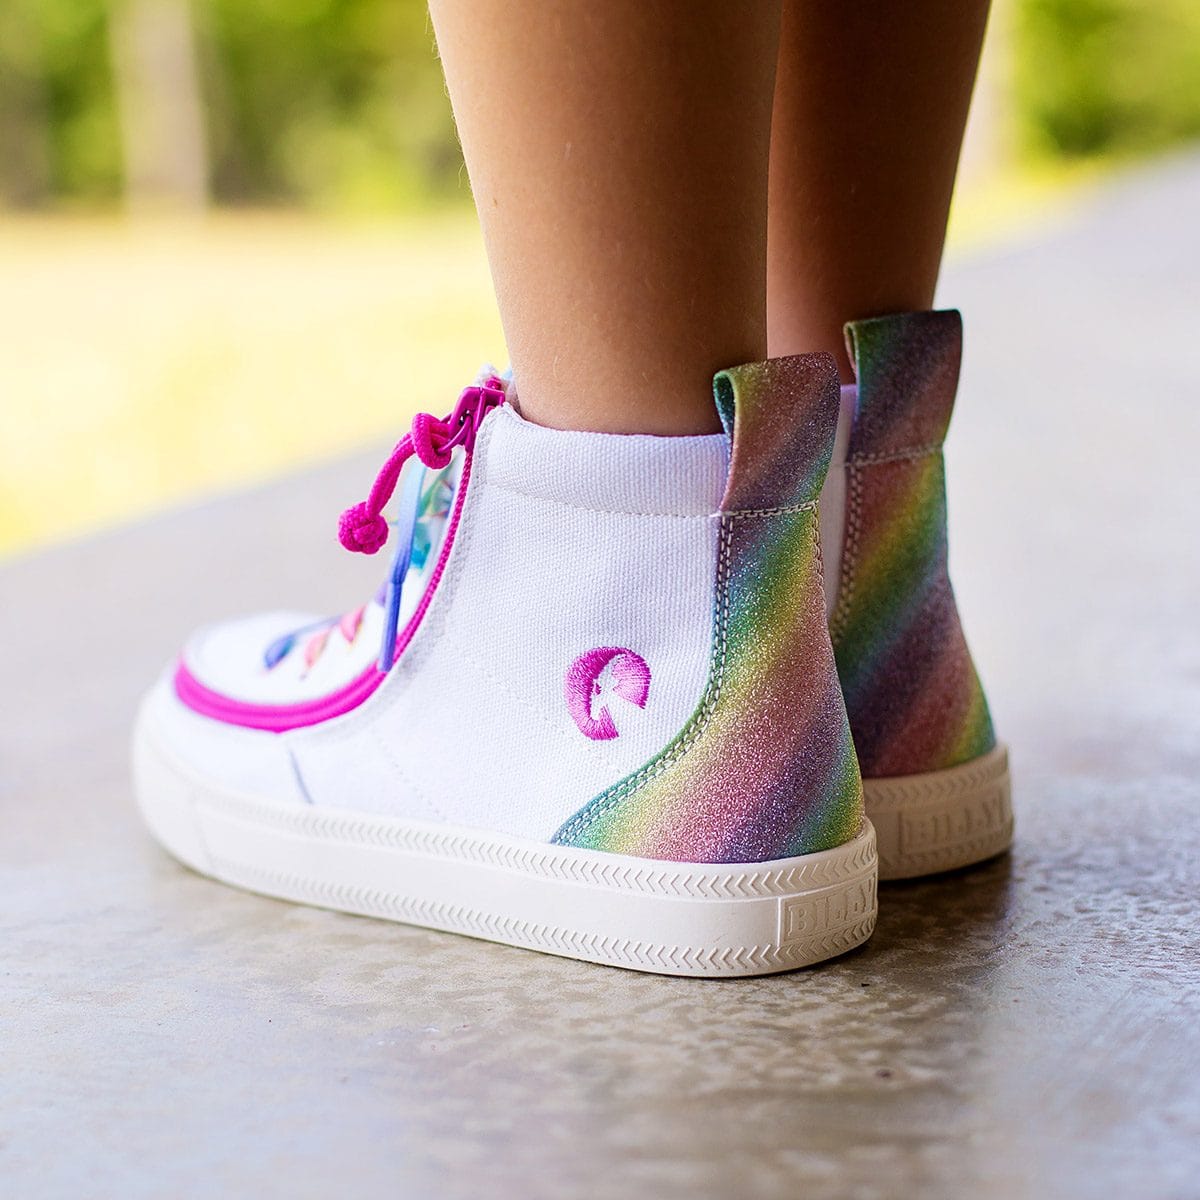 Back To School Shoes Your Student Needs